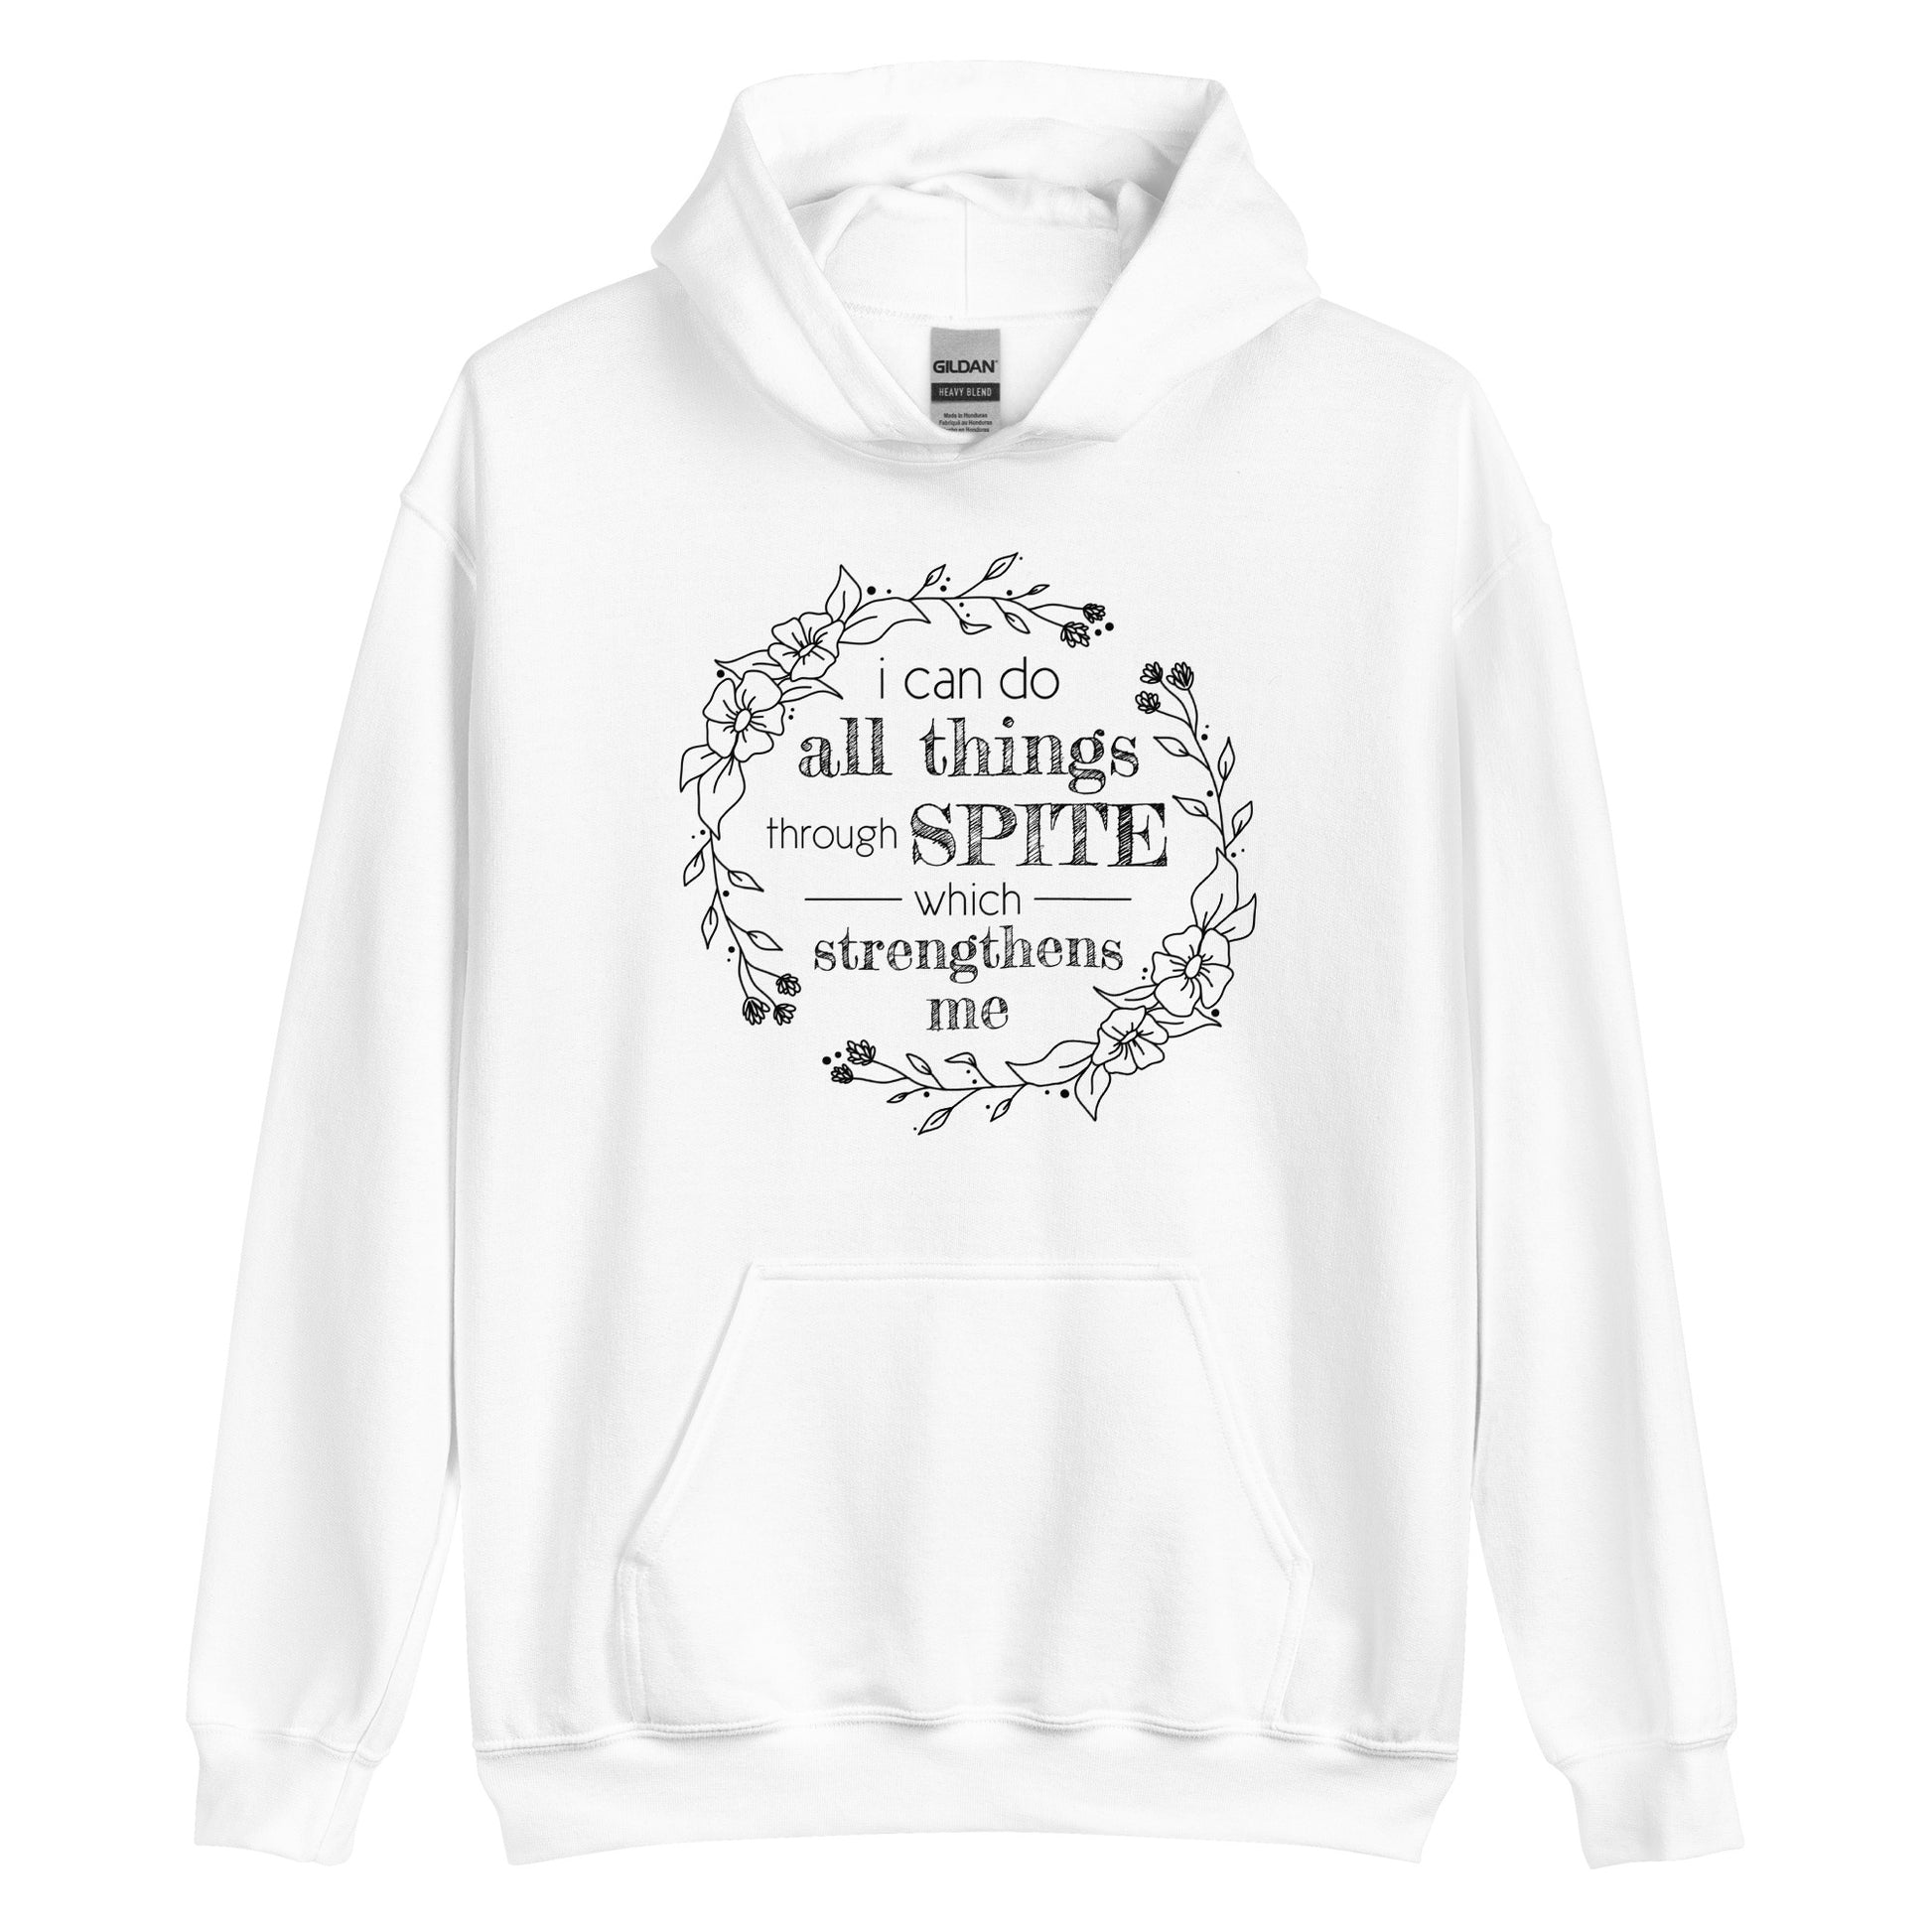 A white hooded sweatshirt featuring an illustration of a floral wreath. Text inside the flowers reads "i can do all things through SPITE which strengthens me"